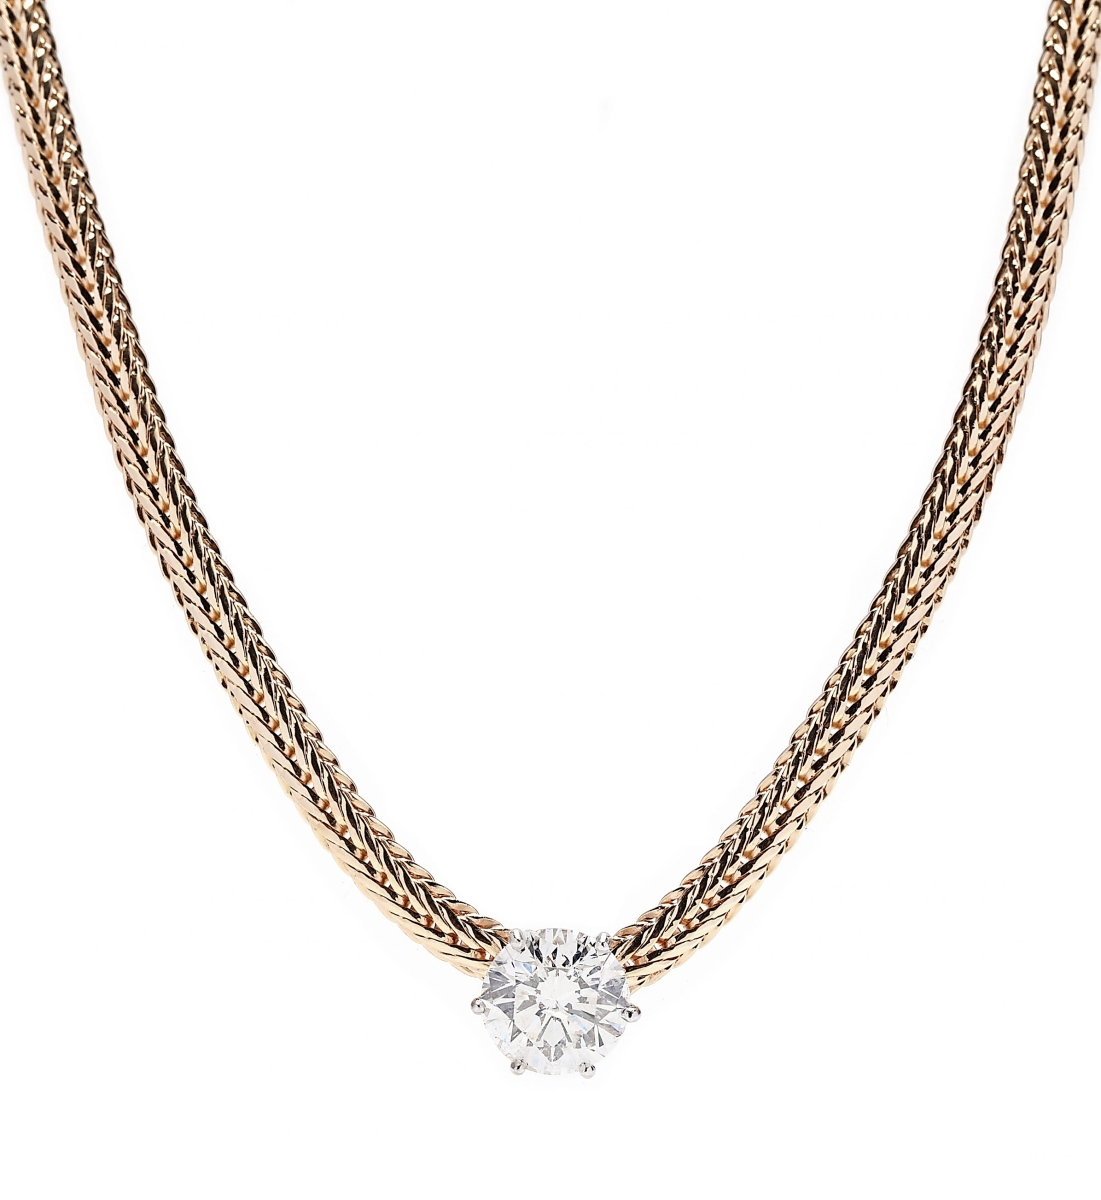 This gold and diamond necklace that sold for $28,800 was also consigned by the Indiana family. Its prong set round brilliant cut diamond weighing 4.25 carats (I color, I1 clarity) centered on a yellow gold wheat chain completed with a box clasp with figure eight safety and was signed Dankner 14K.